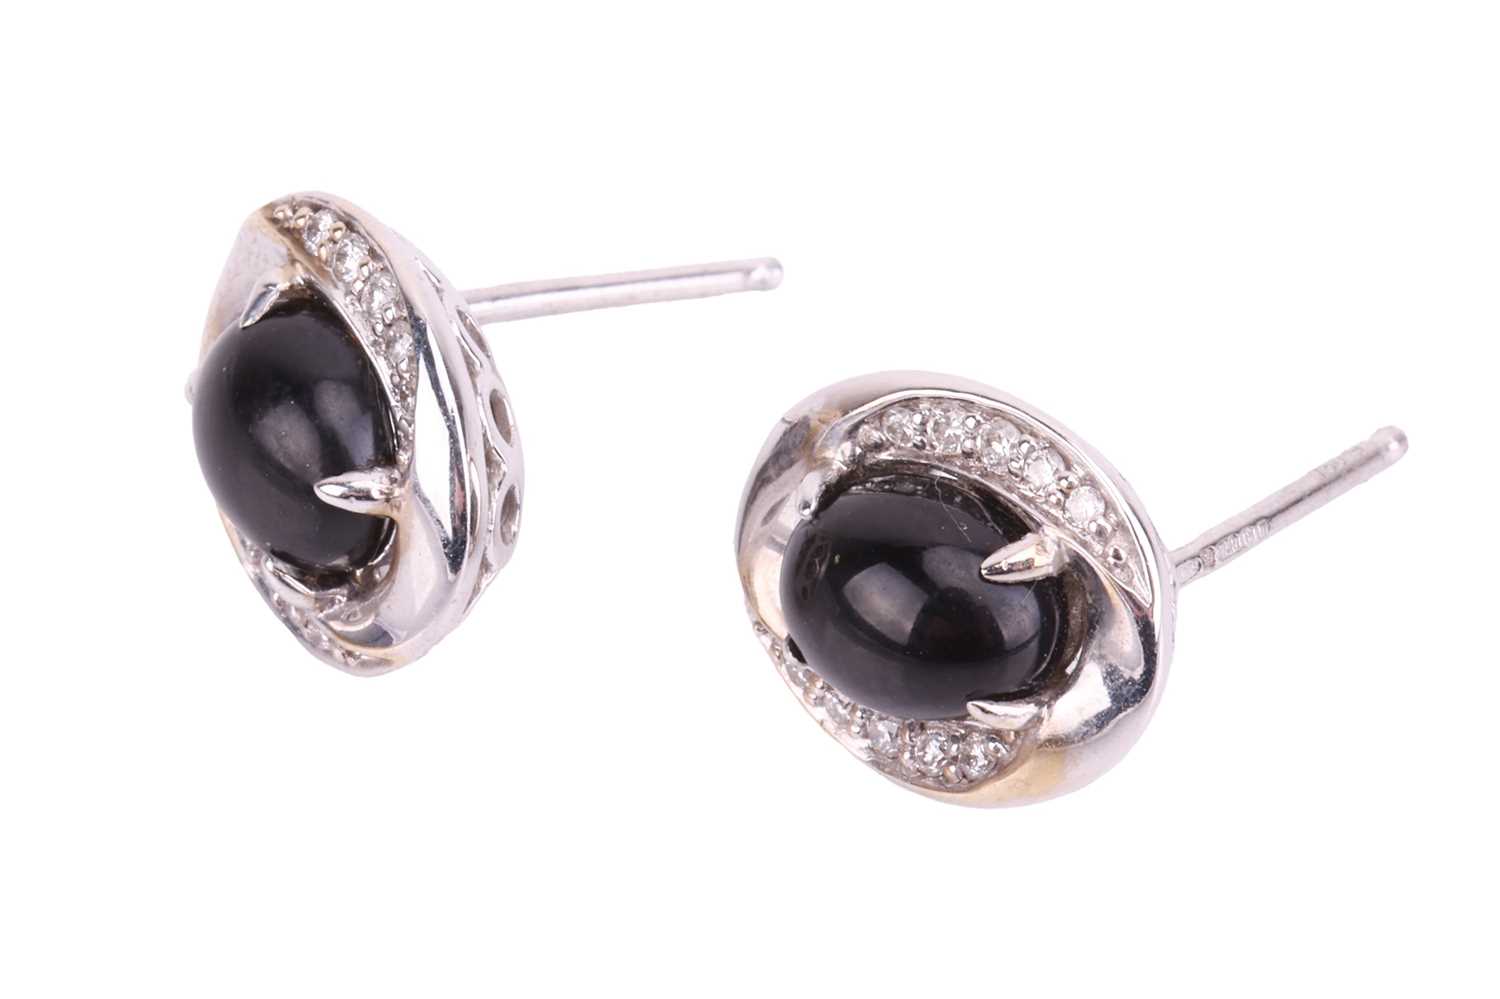 A pair of Whitby jet and diamond stud earrings in 18ct white gold, each containing an oval jet caboc - Image 3 of 3